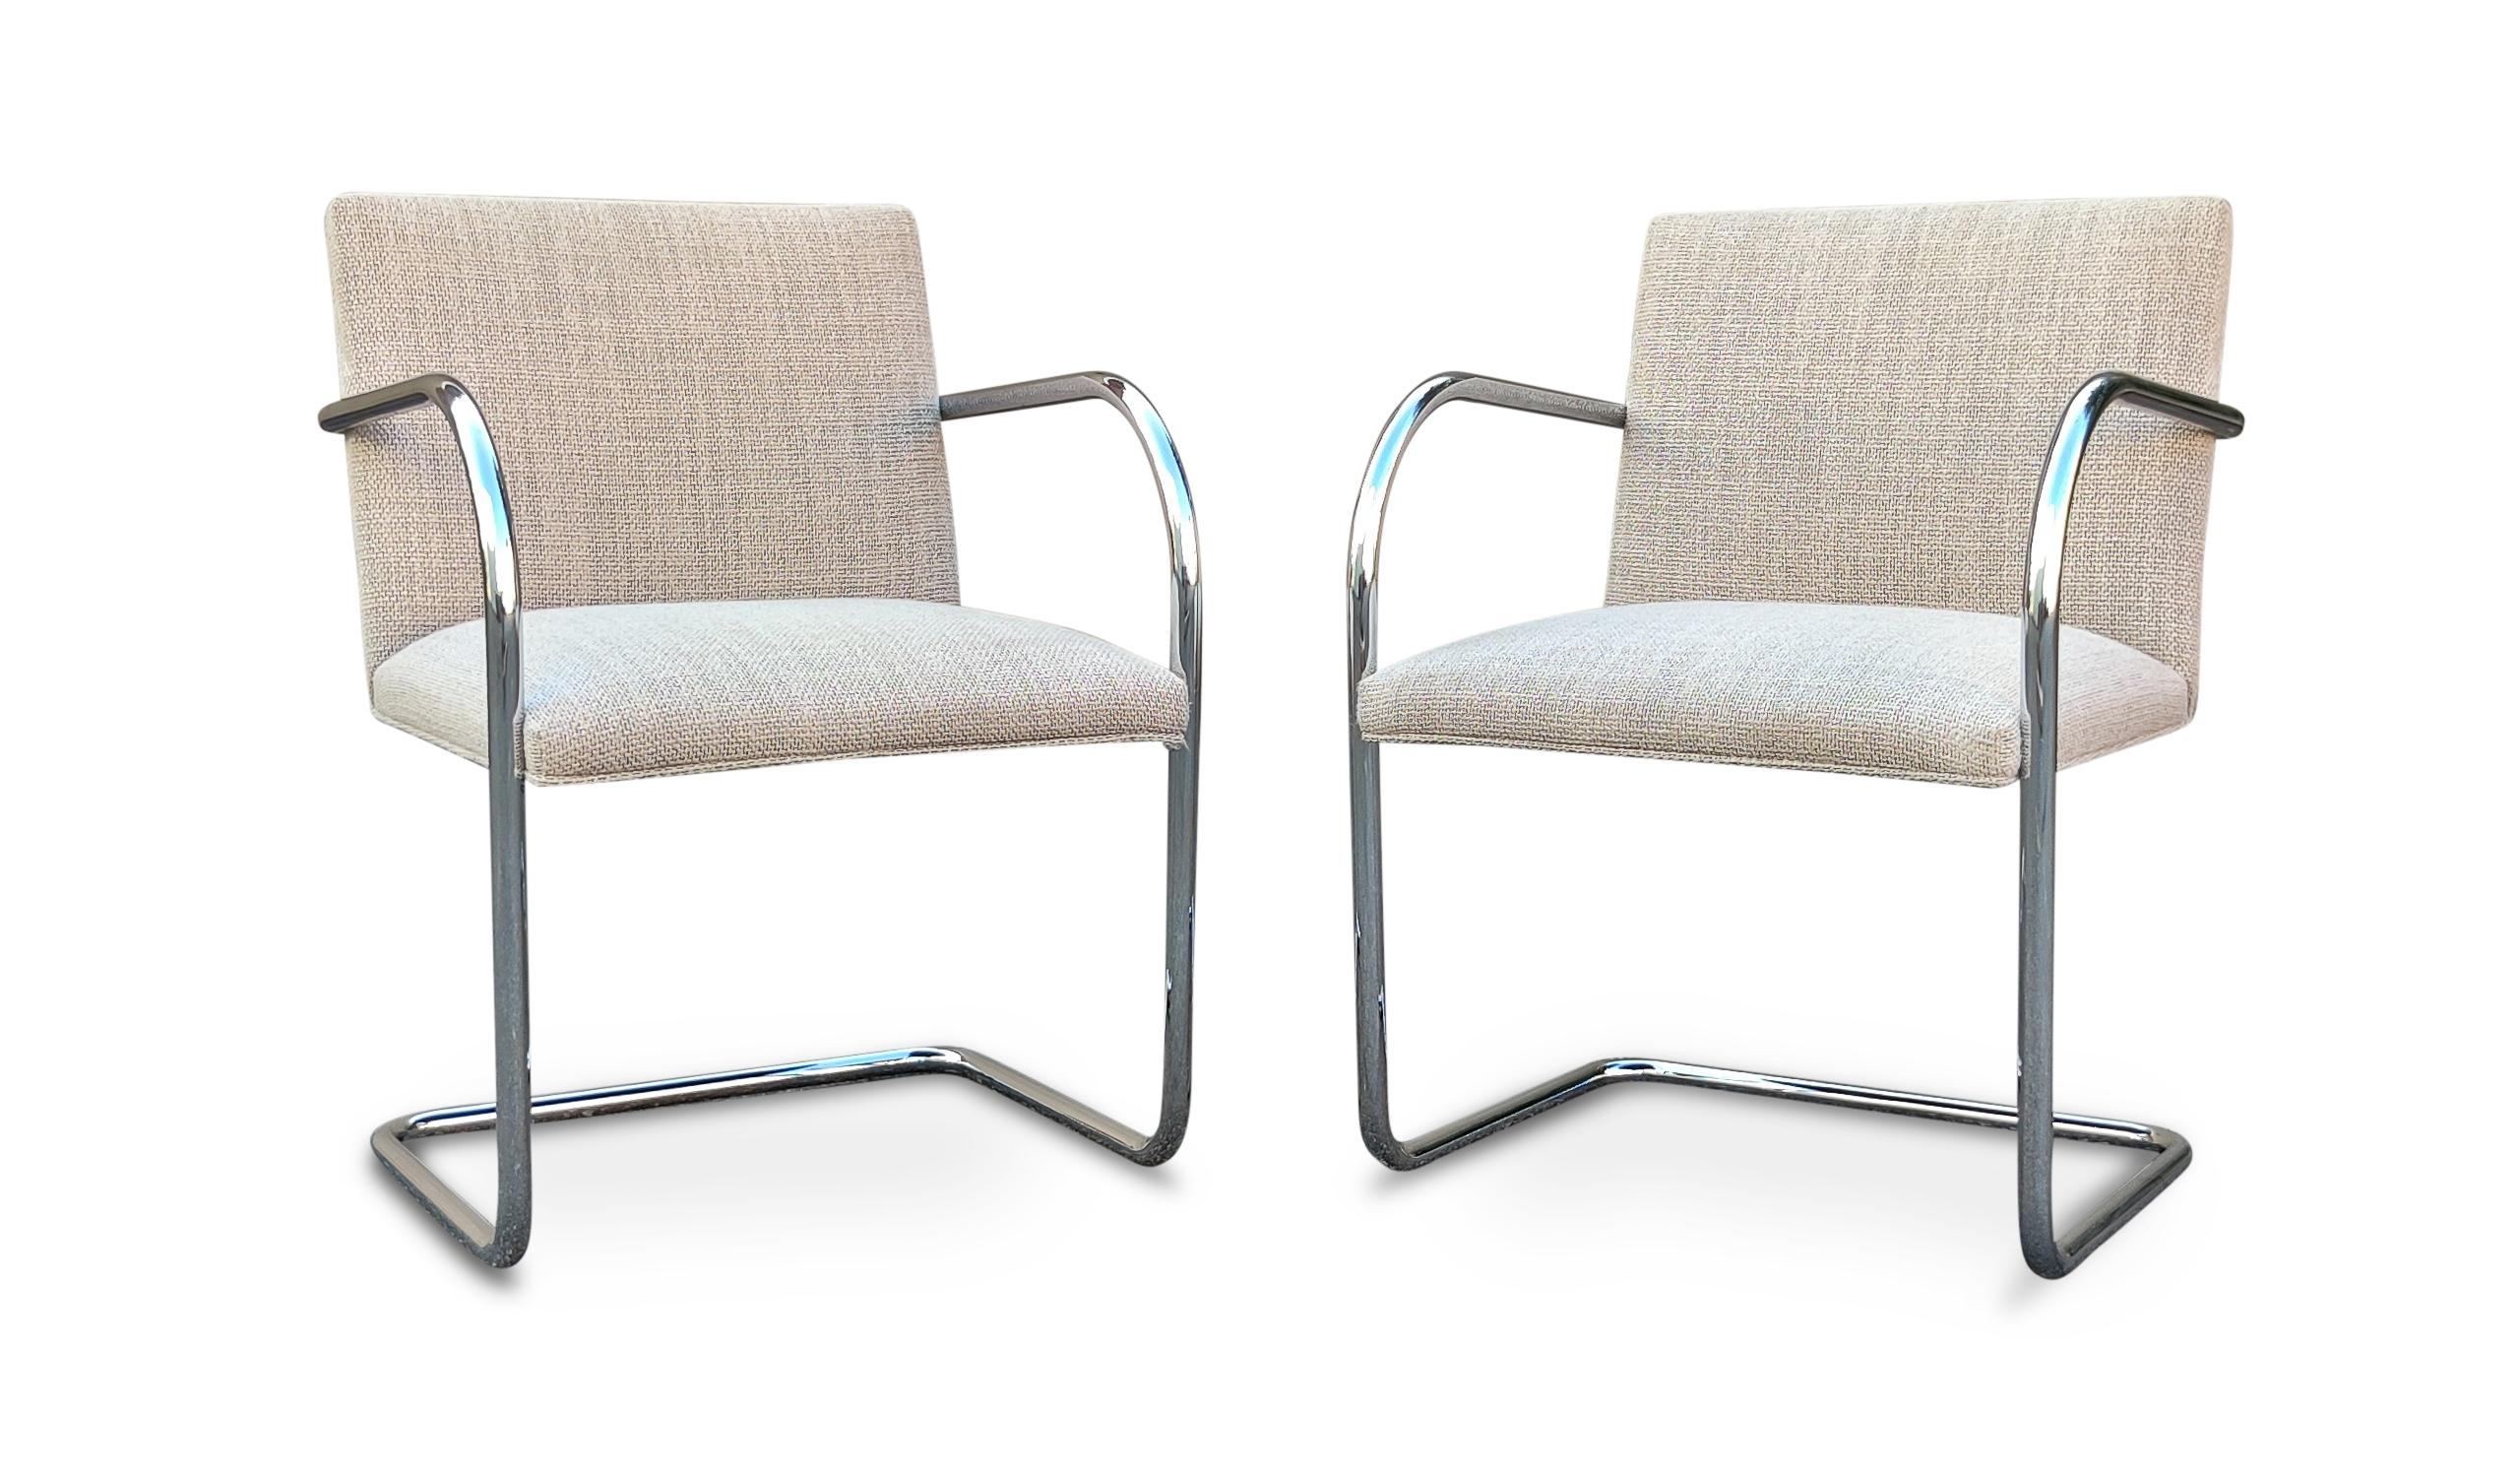 A lovely and complete set of 10 Brno armchair dining chairs designed by Ludwig Mies van der Rohe and produced by Knoll. These feature chrome tubular frames with light grey wool blend fabric. Chairs are in very good and hardly used condition. Each